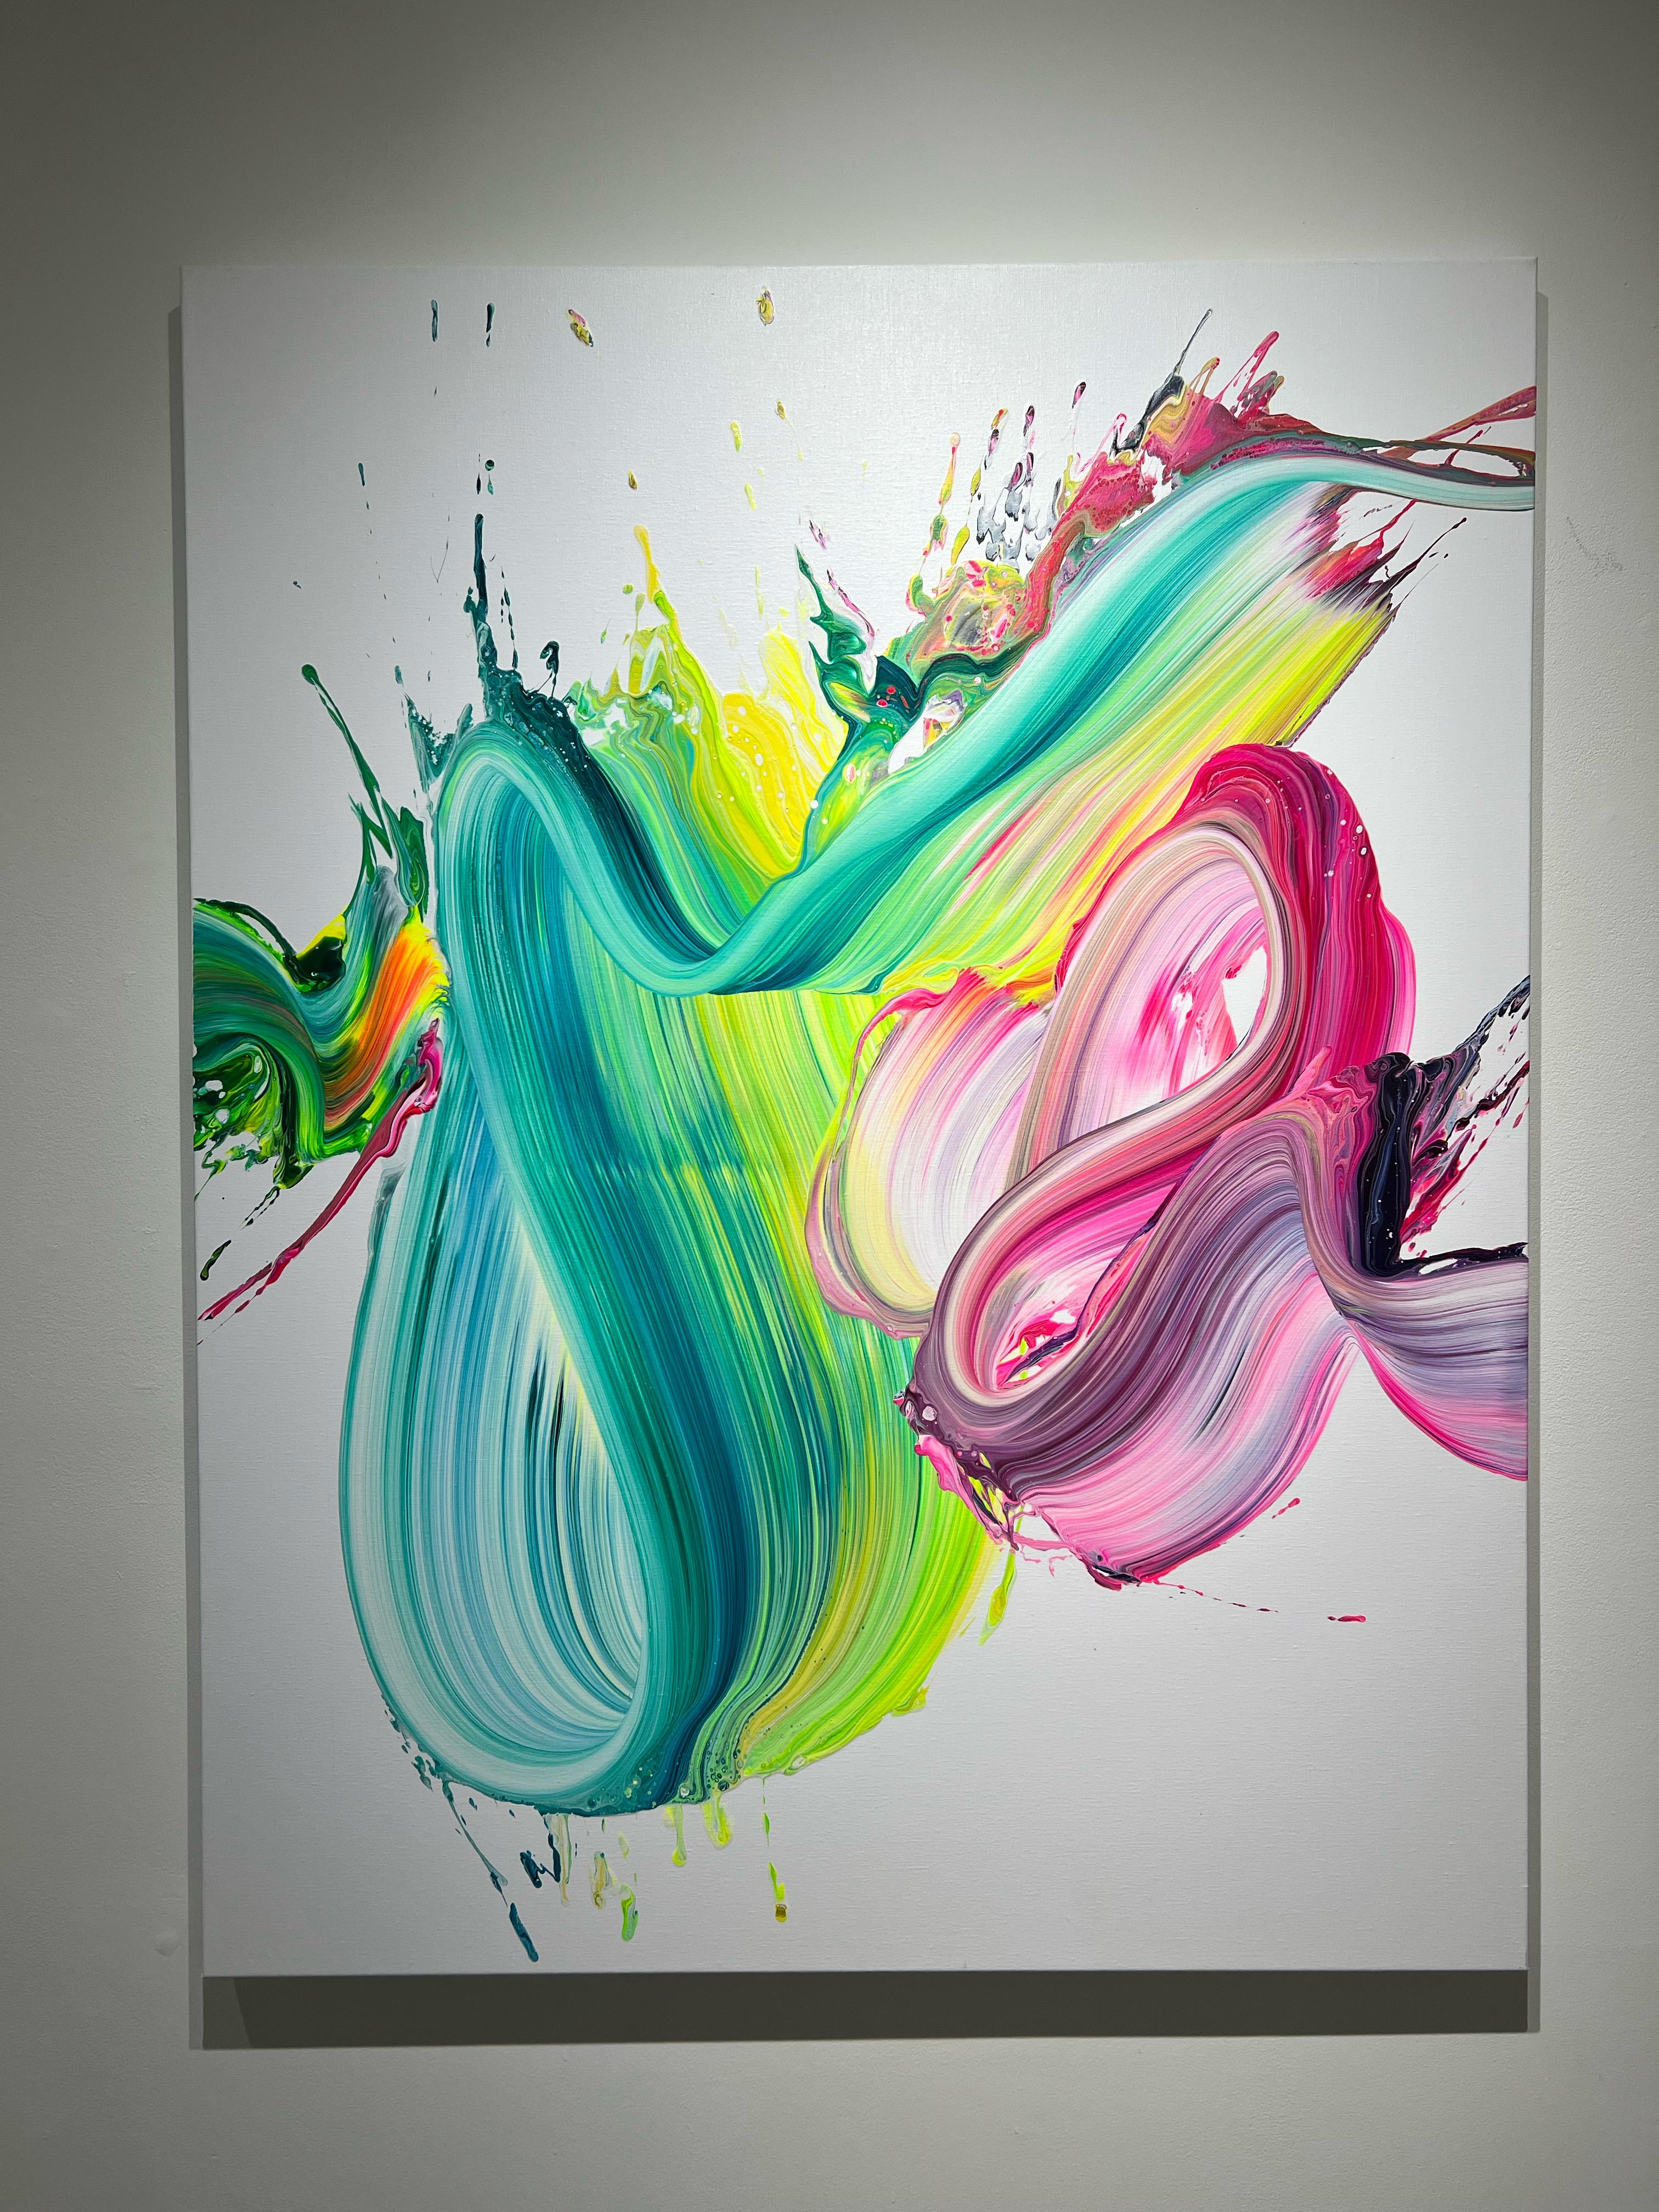 AV 889 -  A Liquid Abstraction in Green, Yellow, and Pink - Painting by Alex Voinea